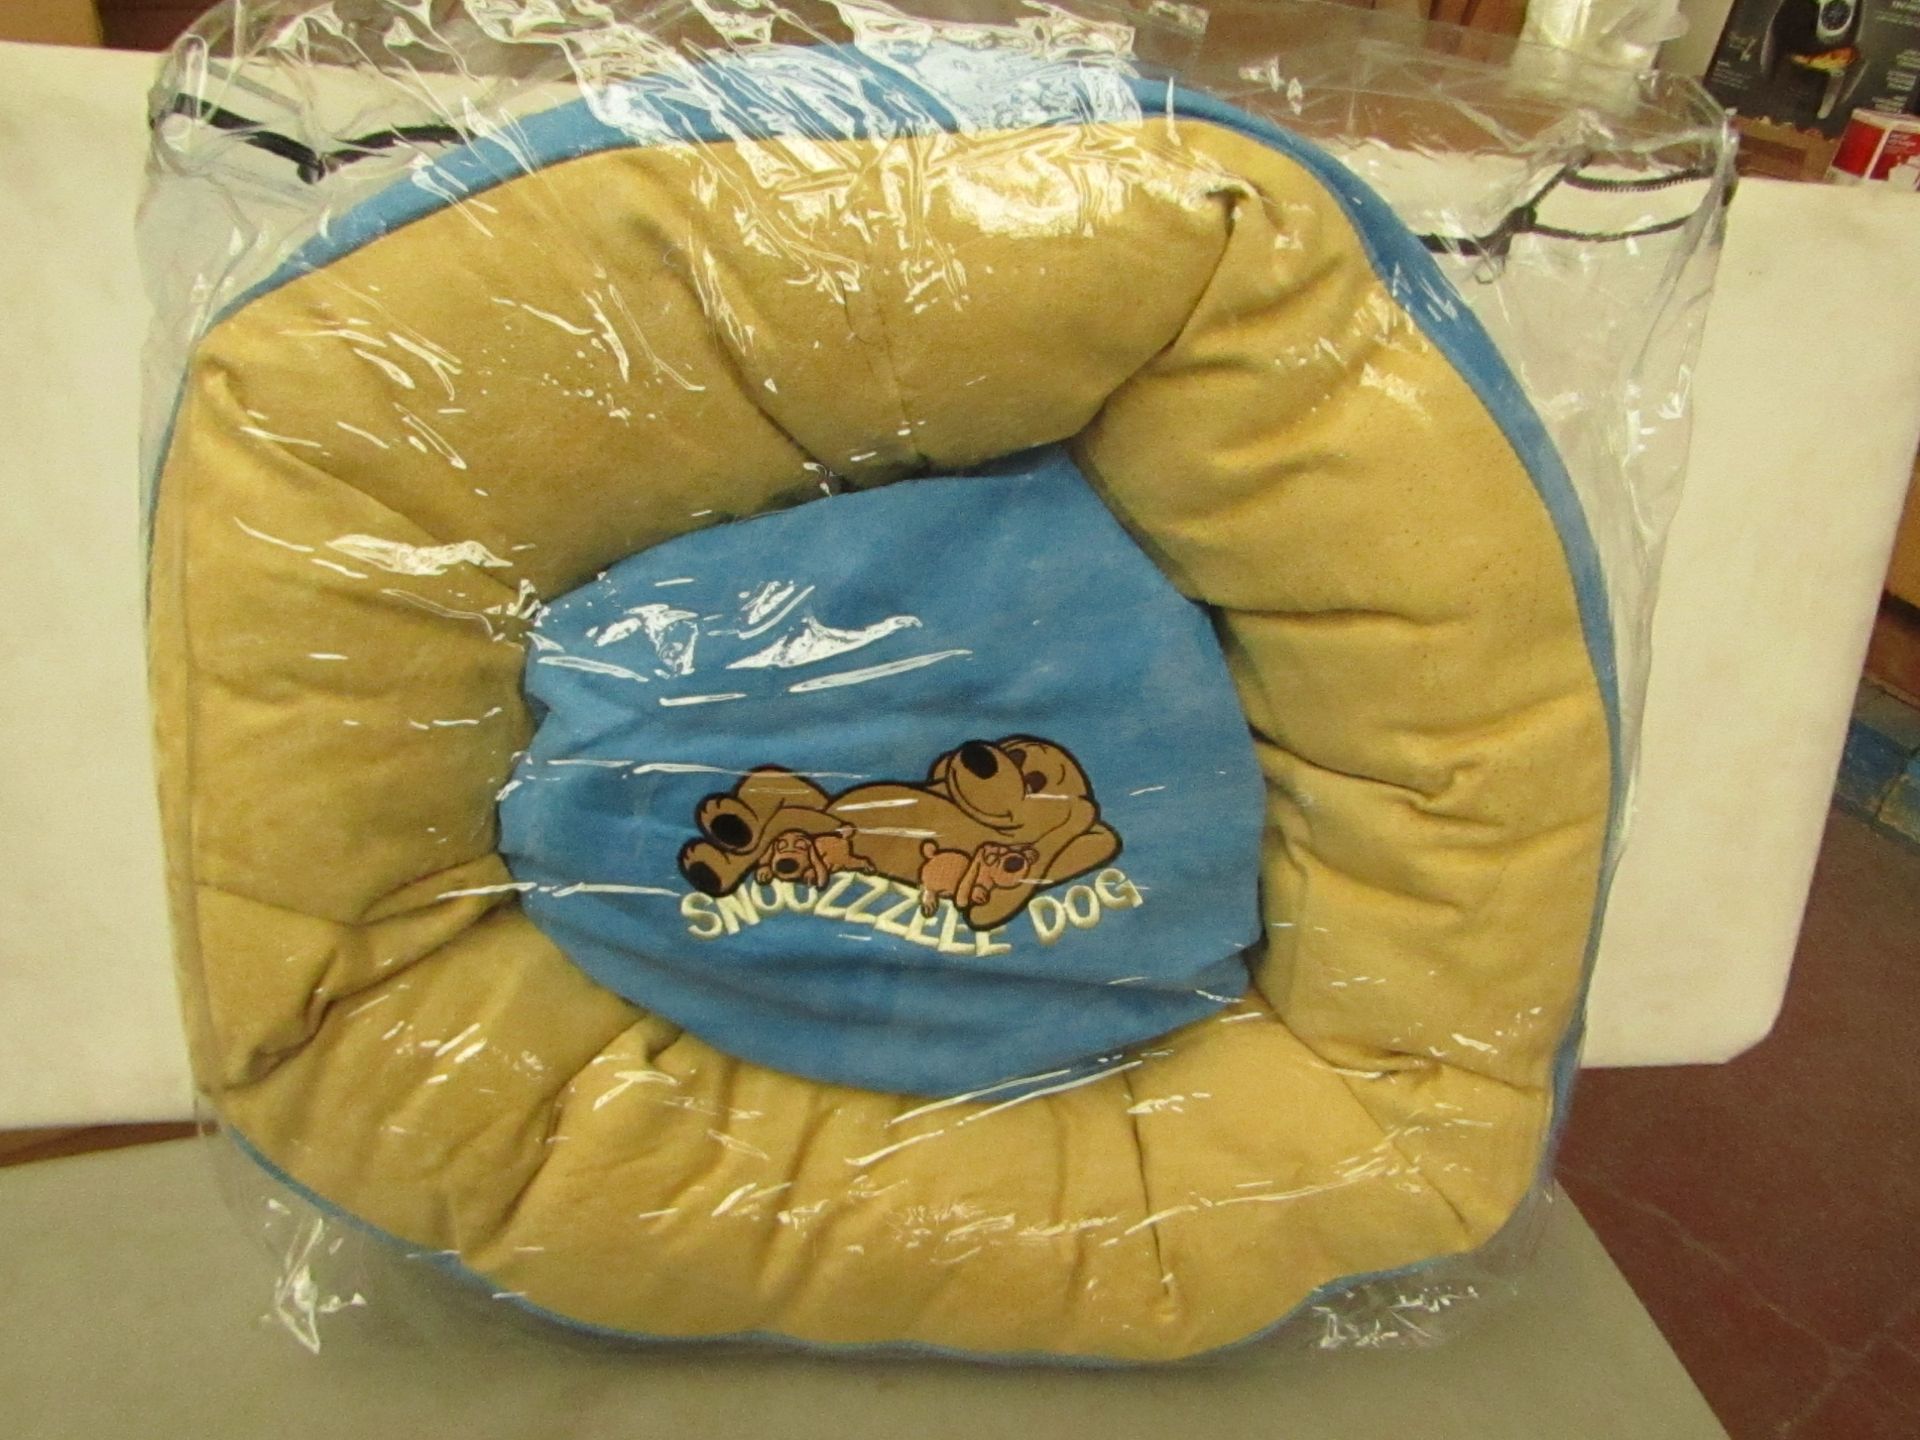 1x Snoozzzeee Dog - Sky Blue Donut Dog Bed (Size 19") - All New & Packaged.